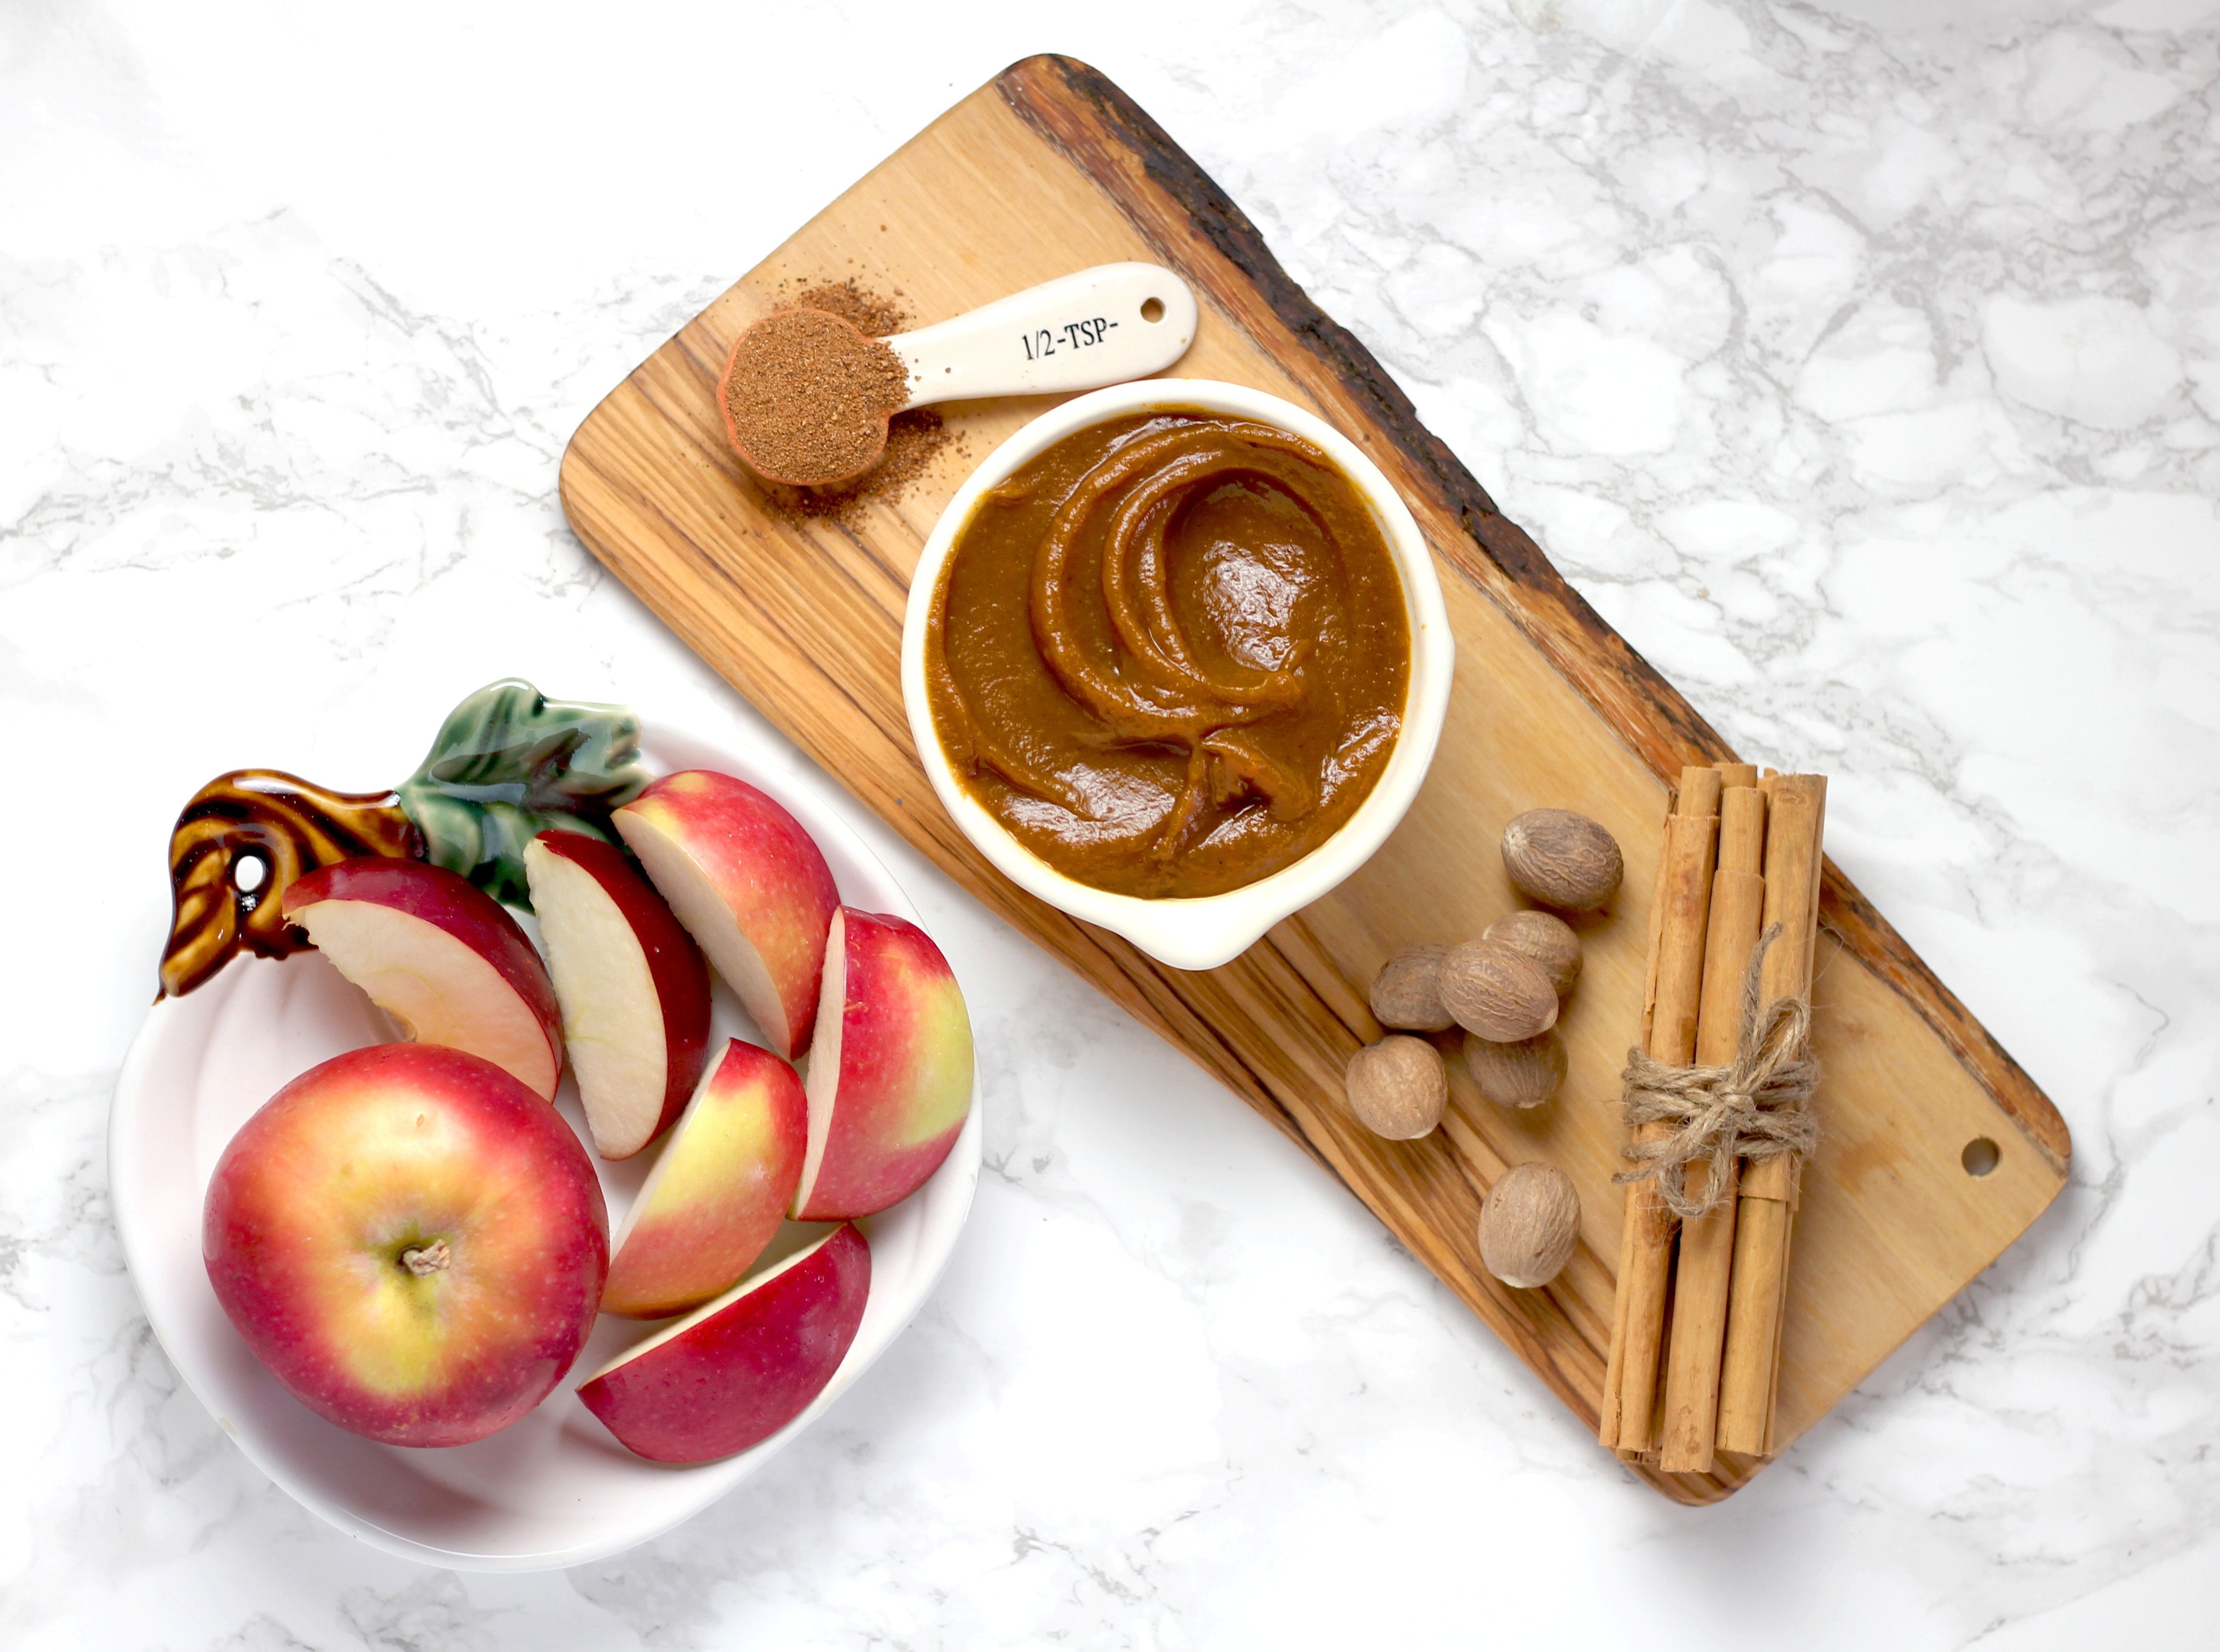 Apple slices with nut butter